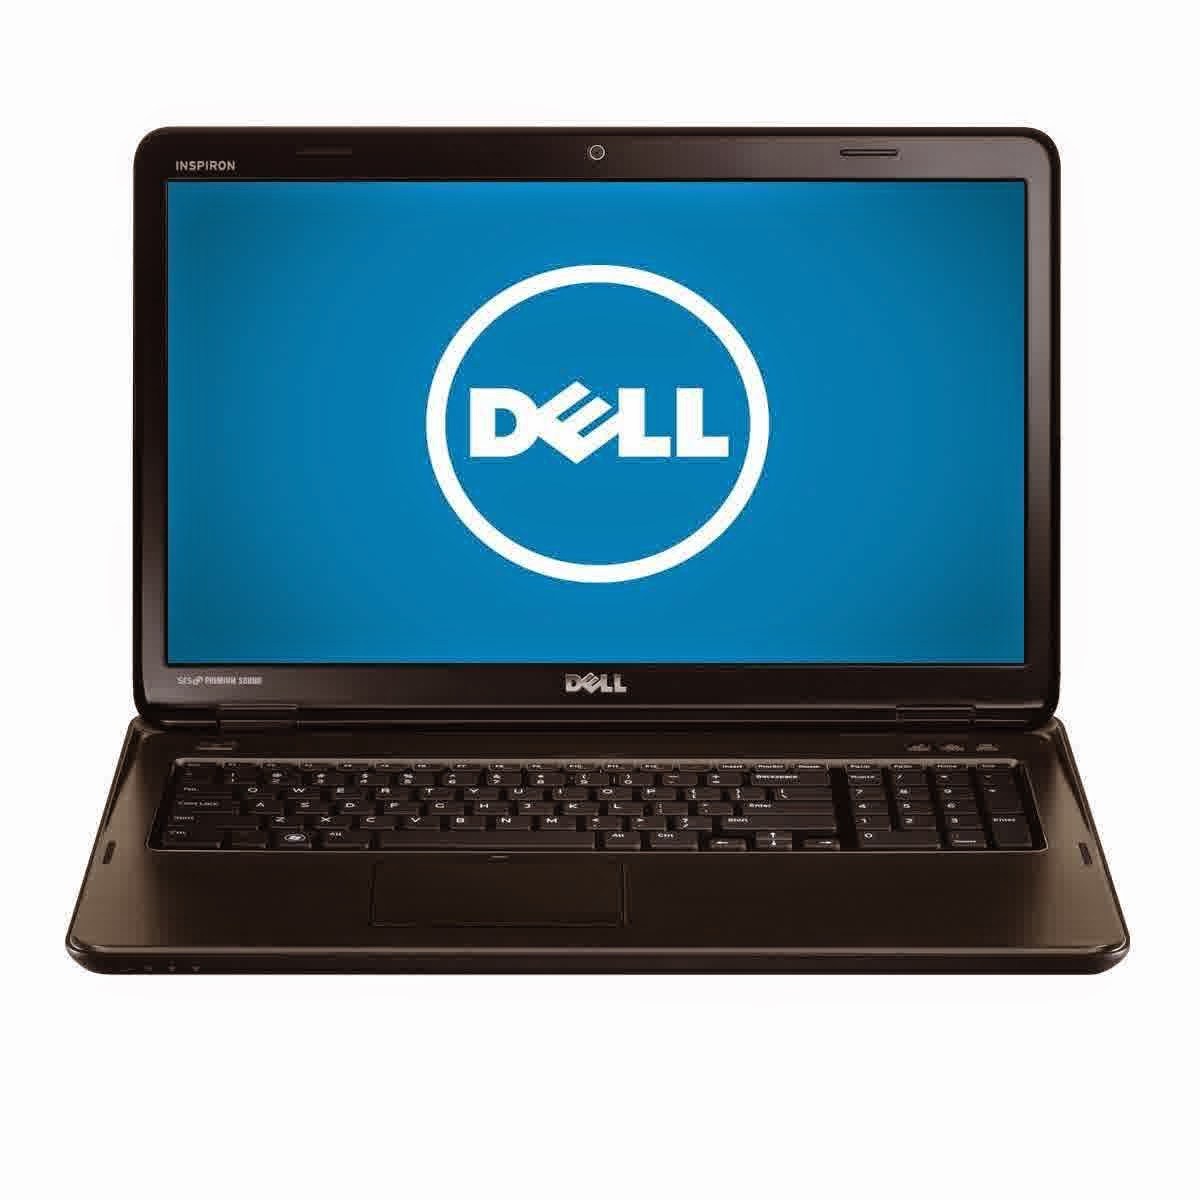 Dell Mouse Drivers For Windows 7